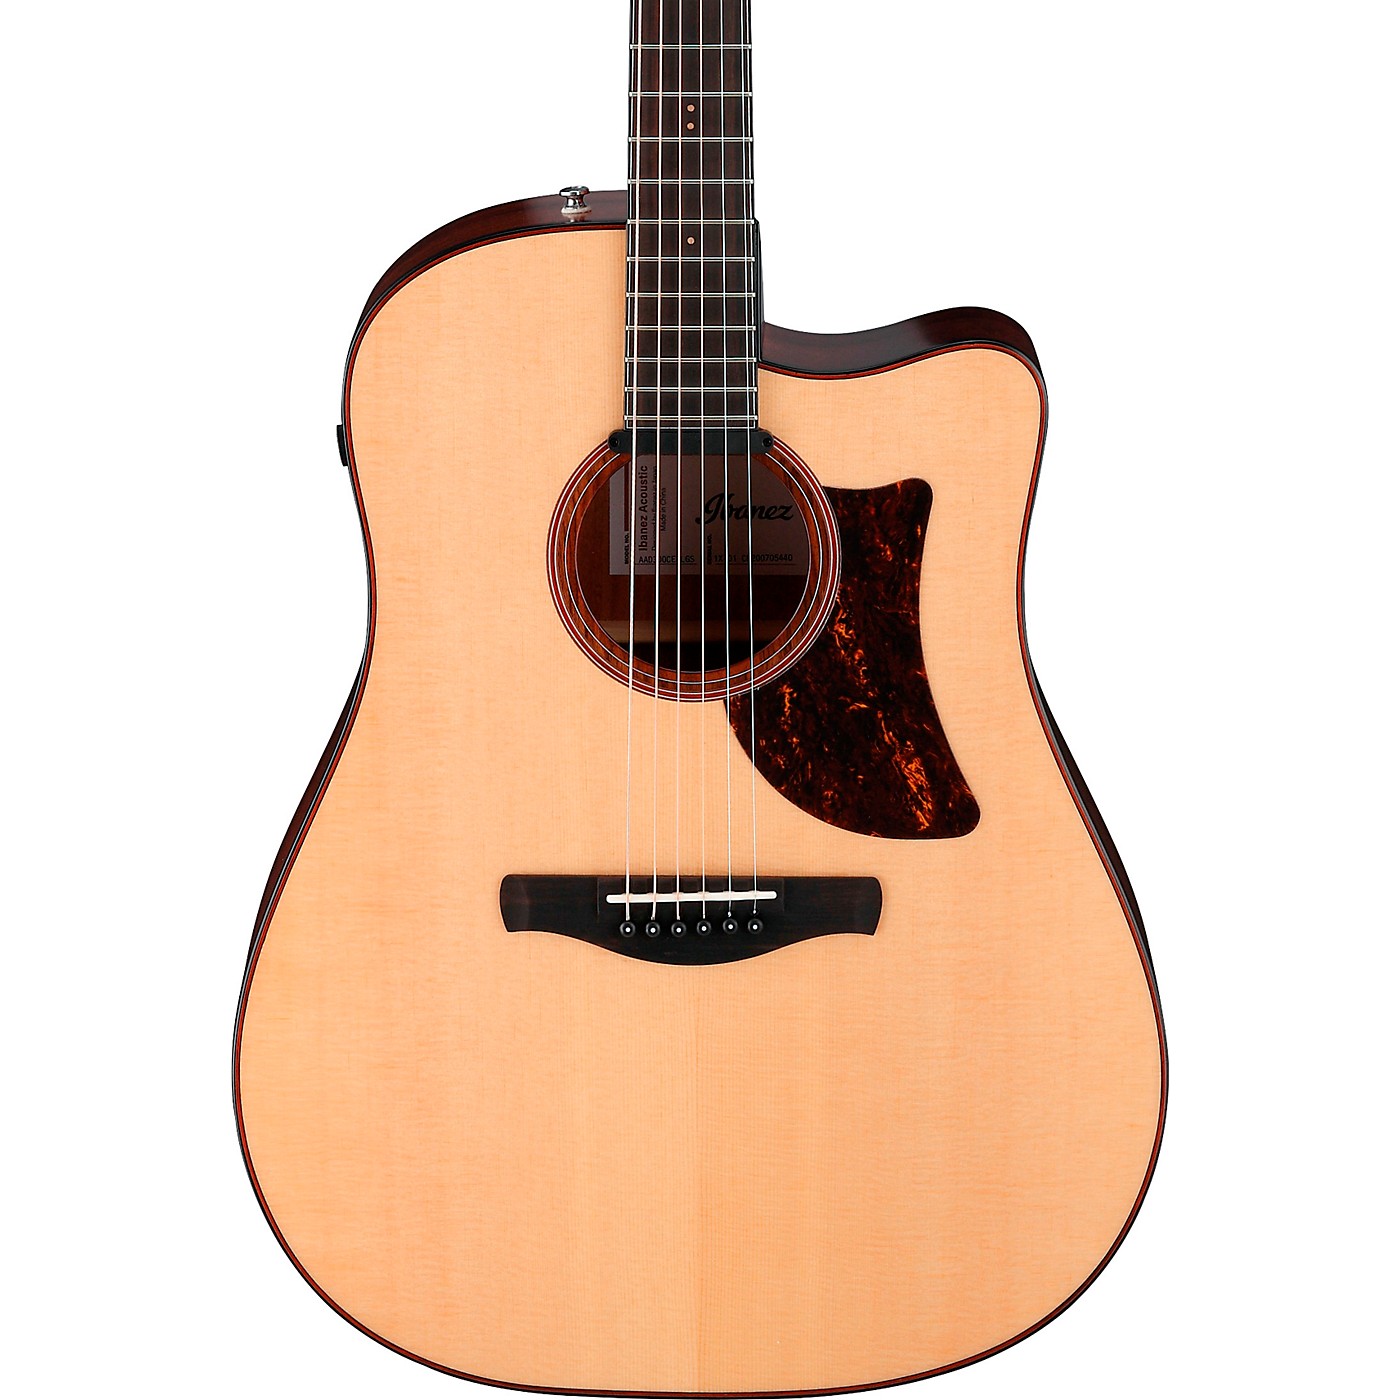 Ibanez AAD300CE Advanced Acoustic-Electric Cutaway Dreadnought Guitar thumbnail